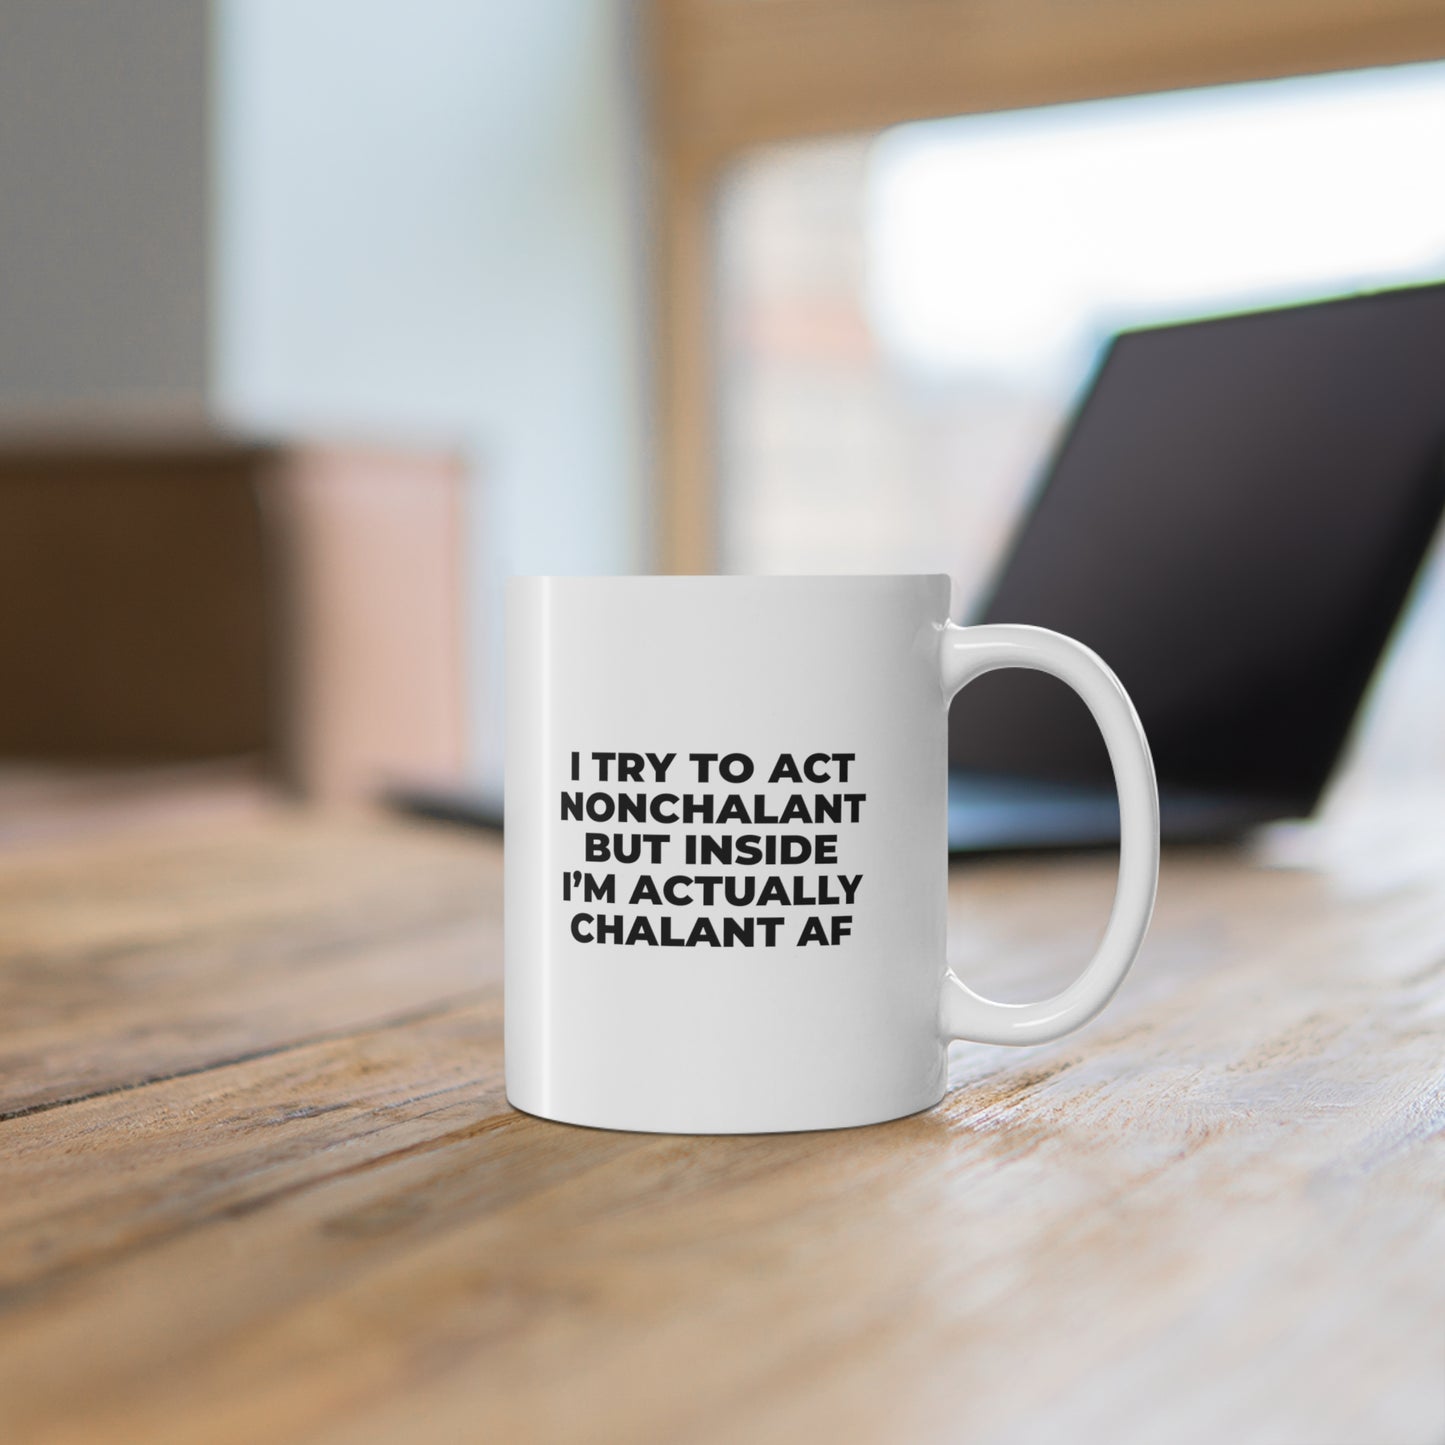 11oz ceramic mug with quote I try to act nonchalant but inside I am actually chalant AF